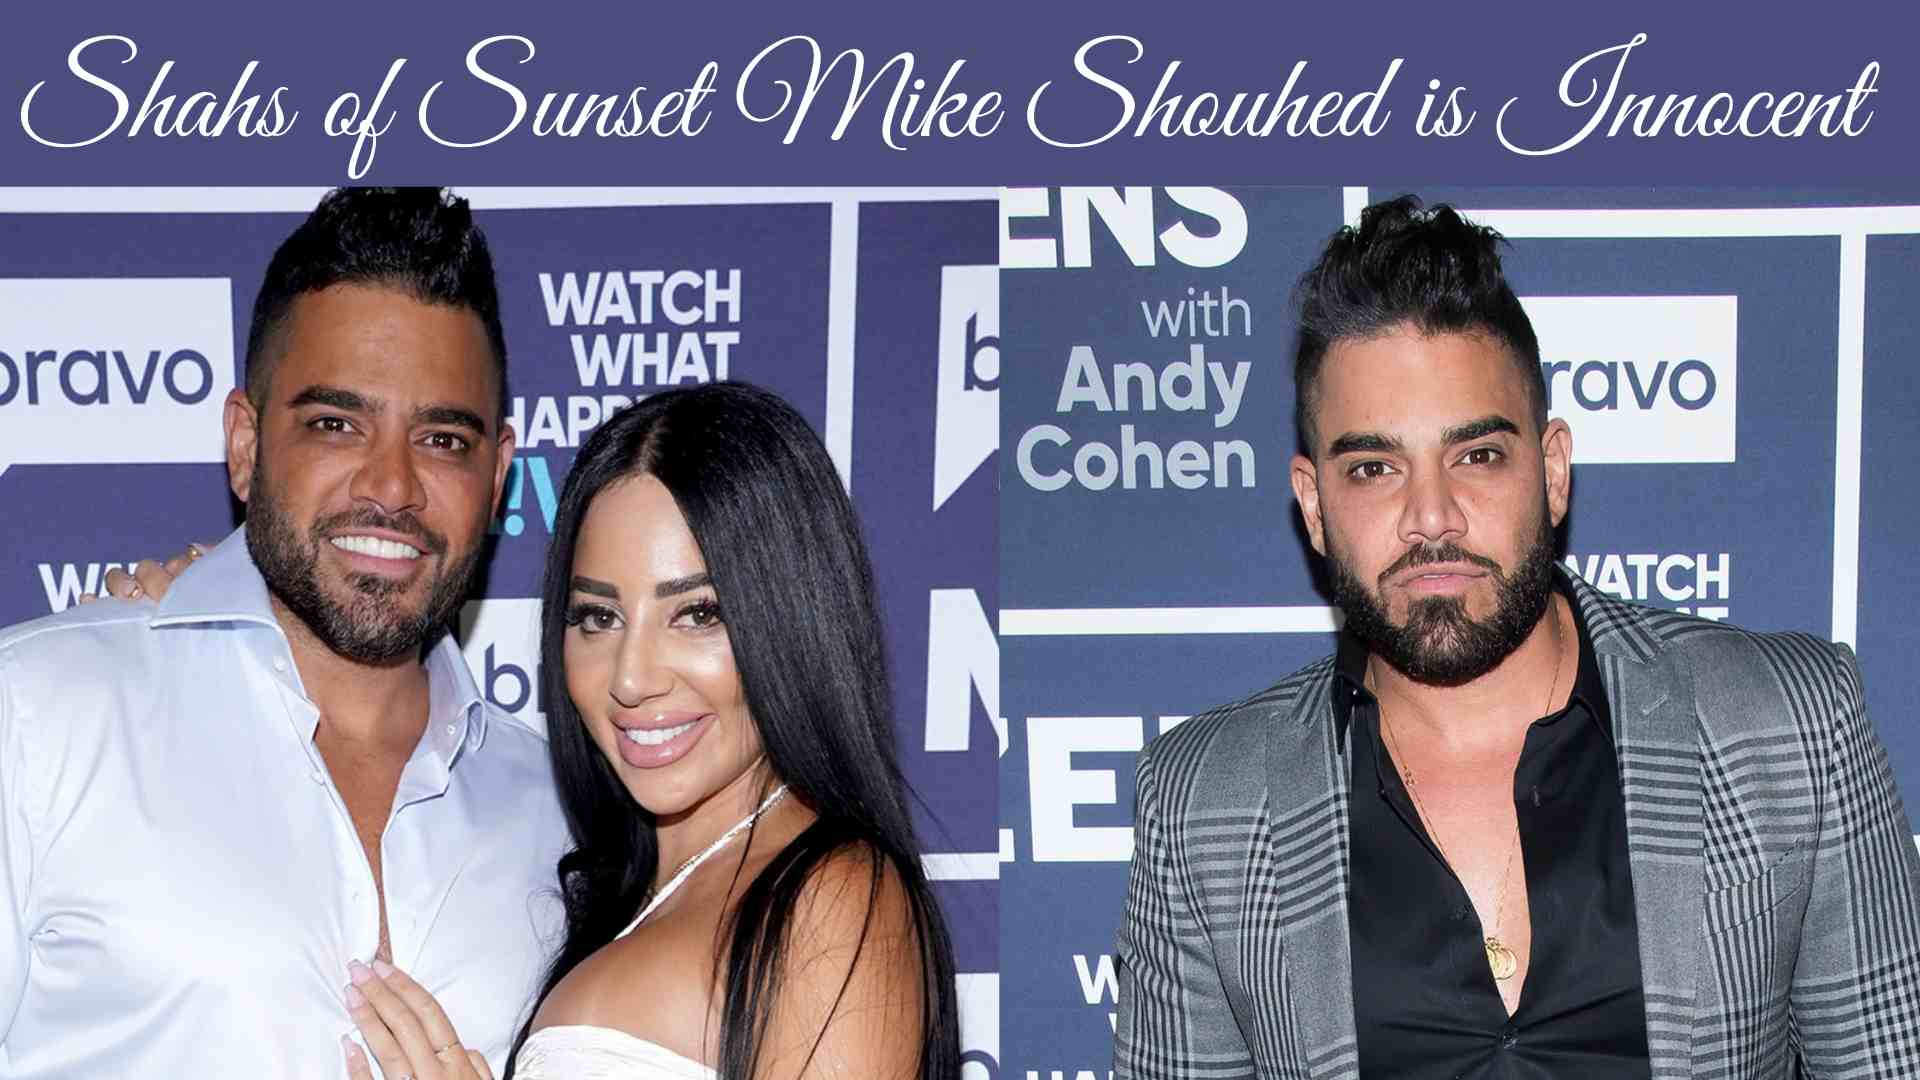 Shahs of Sunset Mike Shouhed is Innocent Wallpaper and images